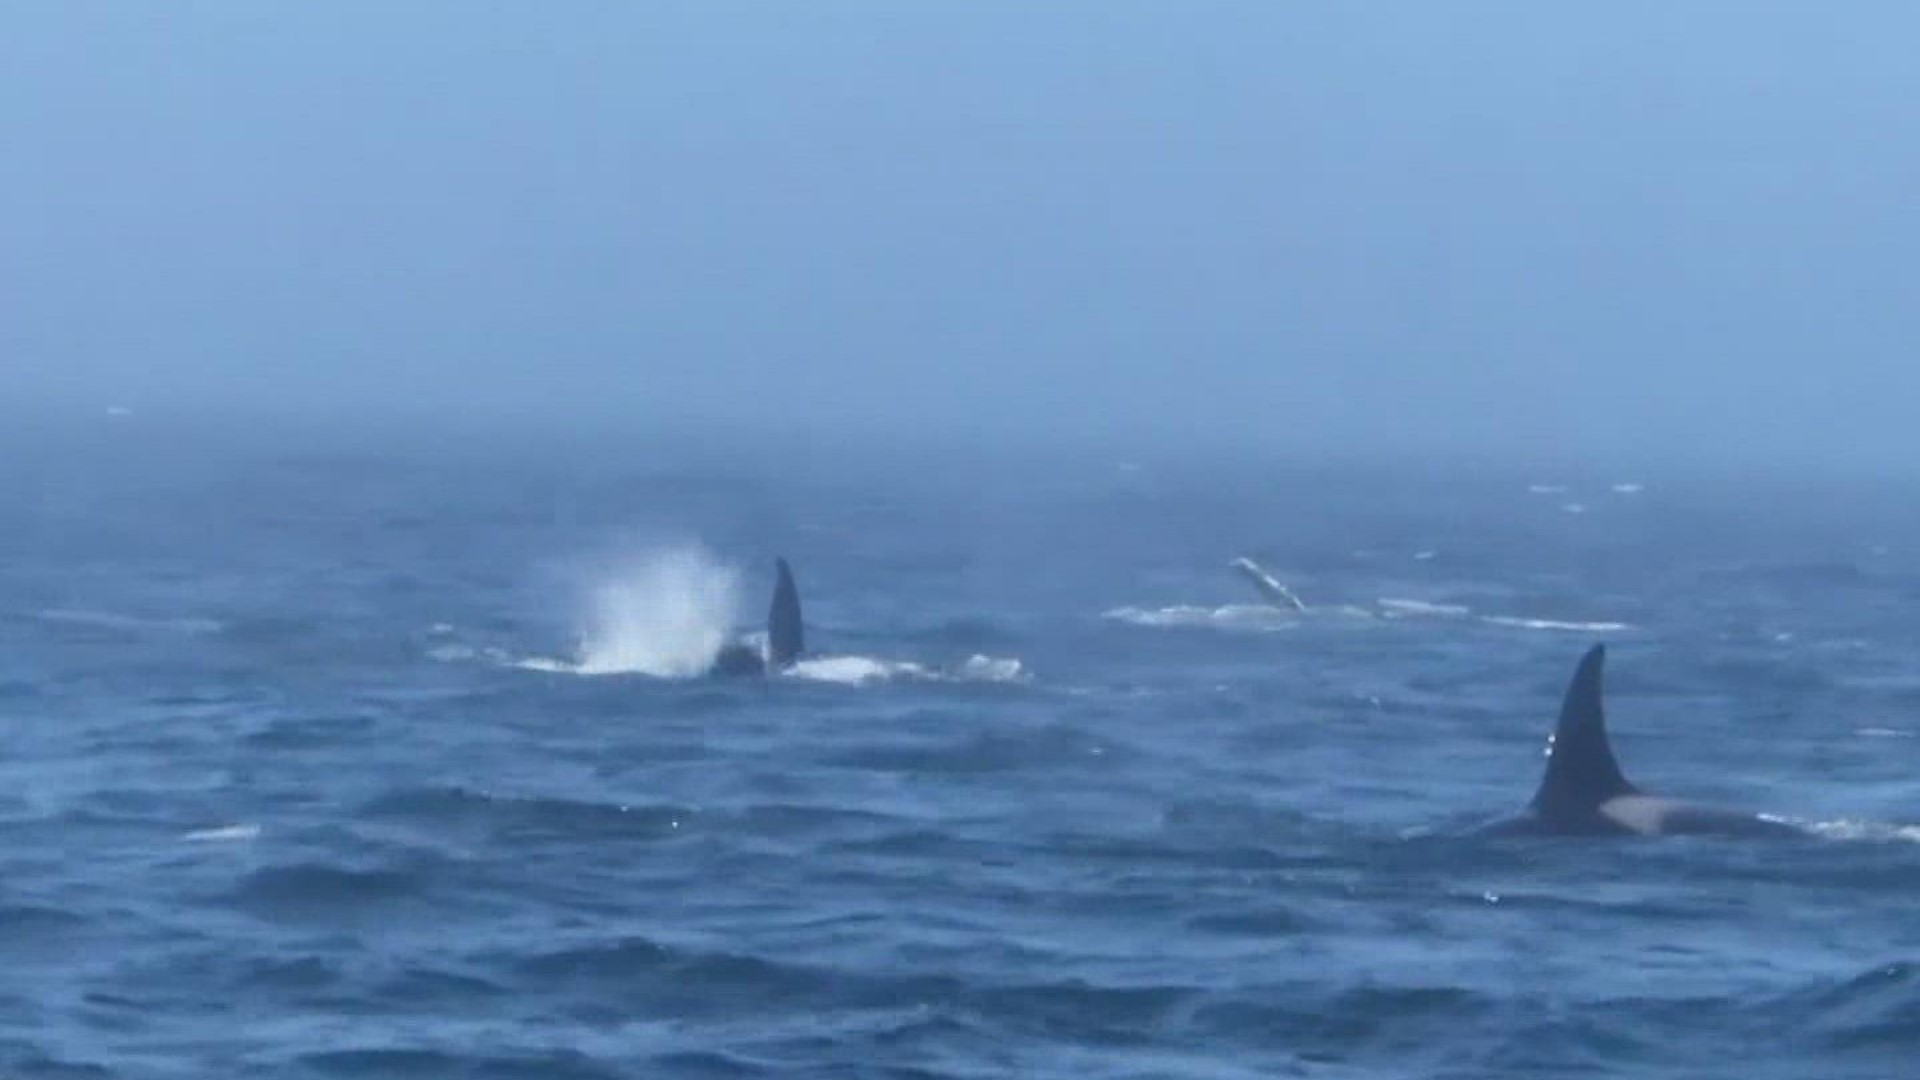 The Pacific Whale Watch Association says the encounter lasted for hours before the groups of whales slipped out of view.